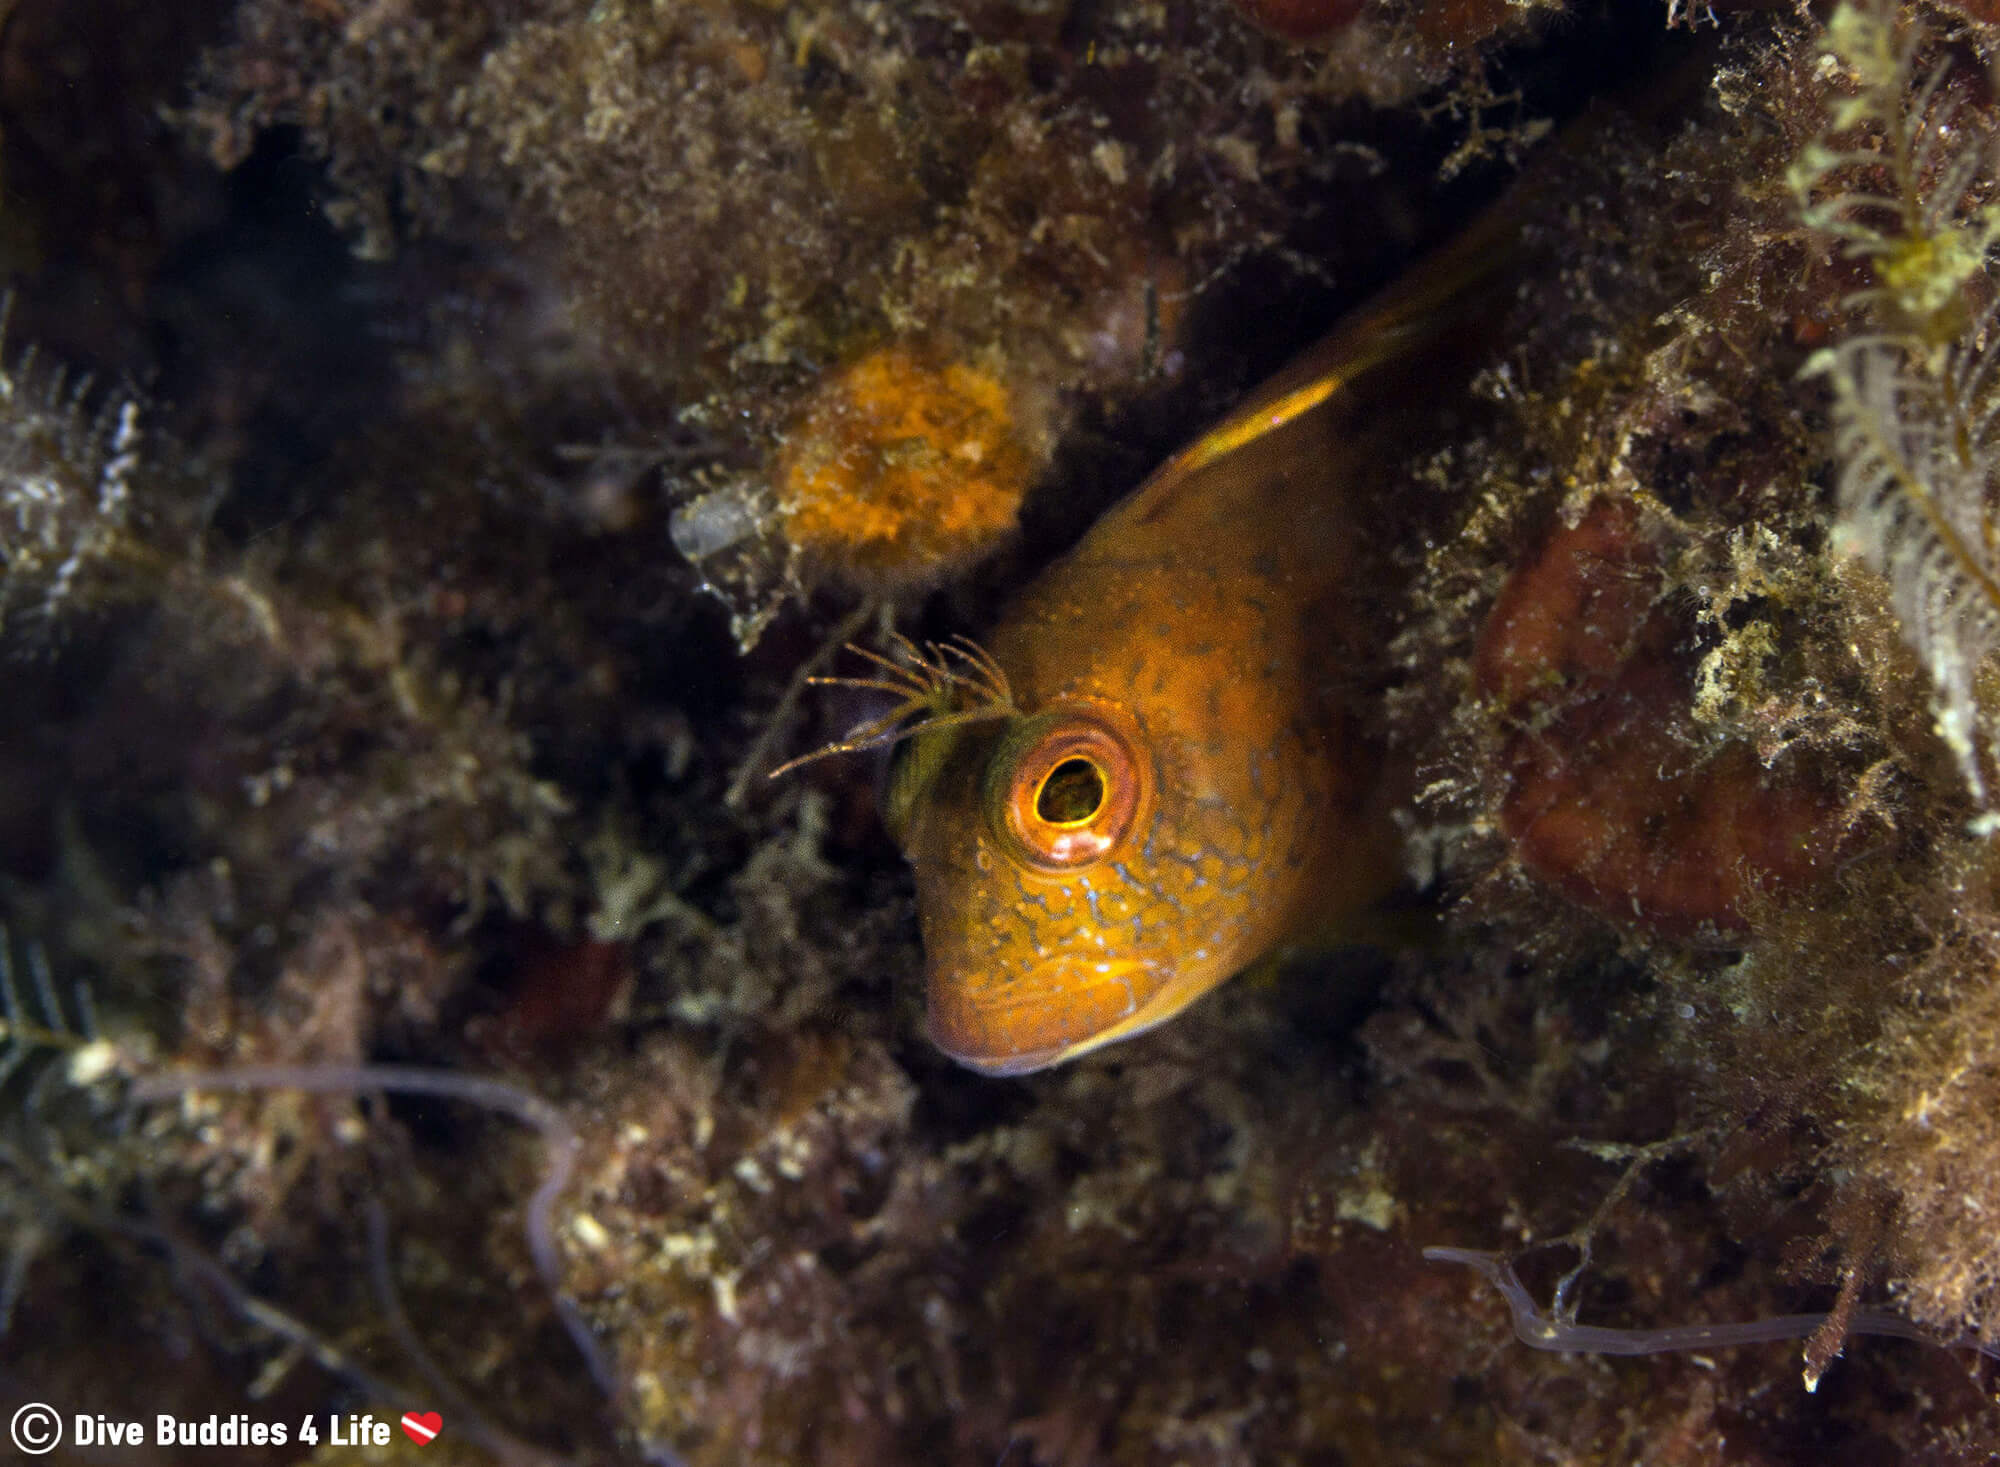 A Yellow Blennny Fish In The Marine Plant Life Of Costa Del Sol In Spain, Europe 